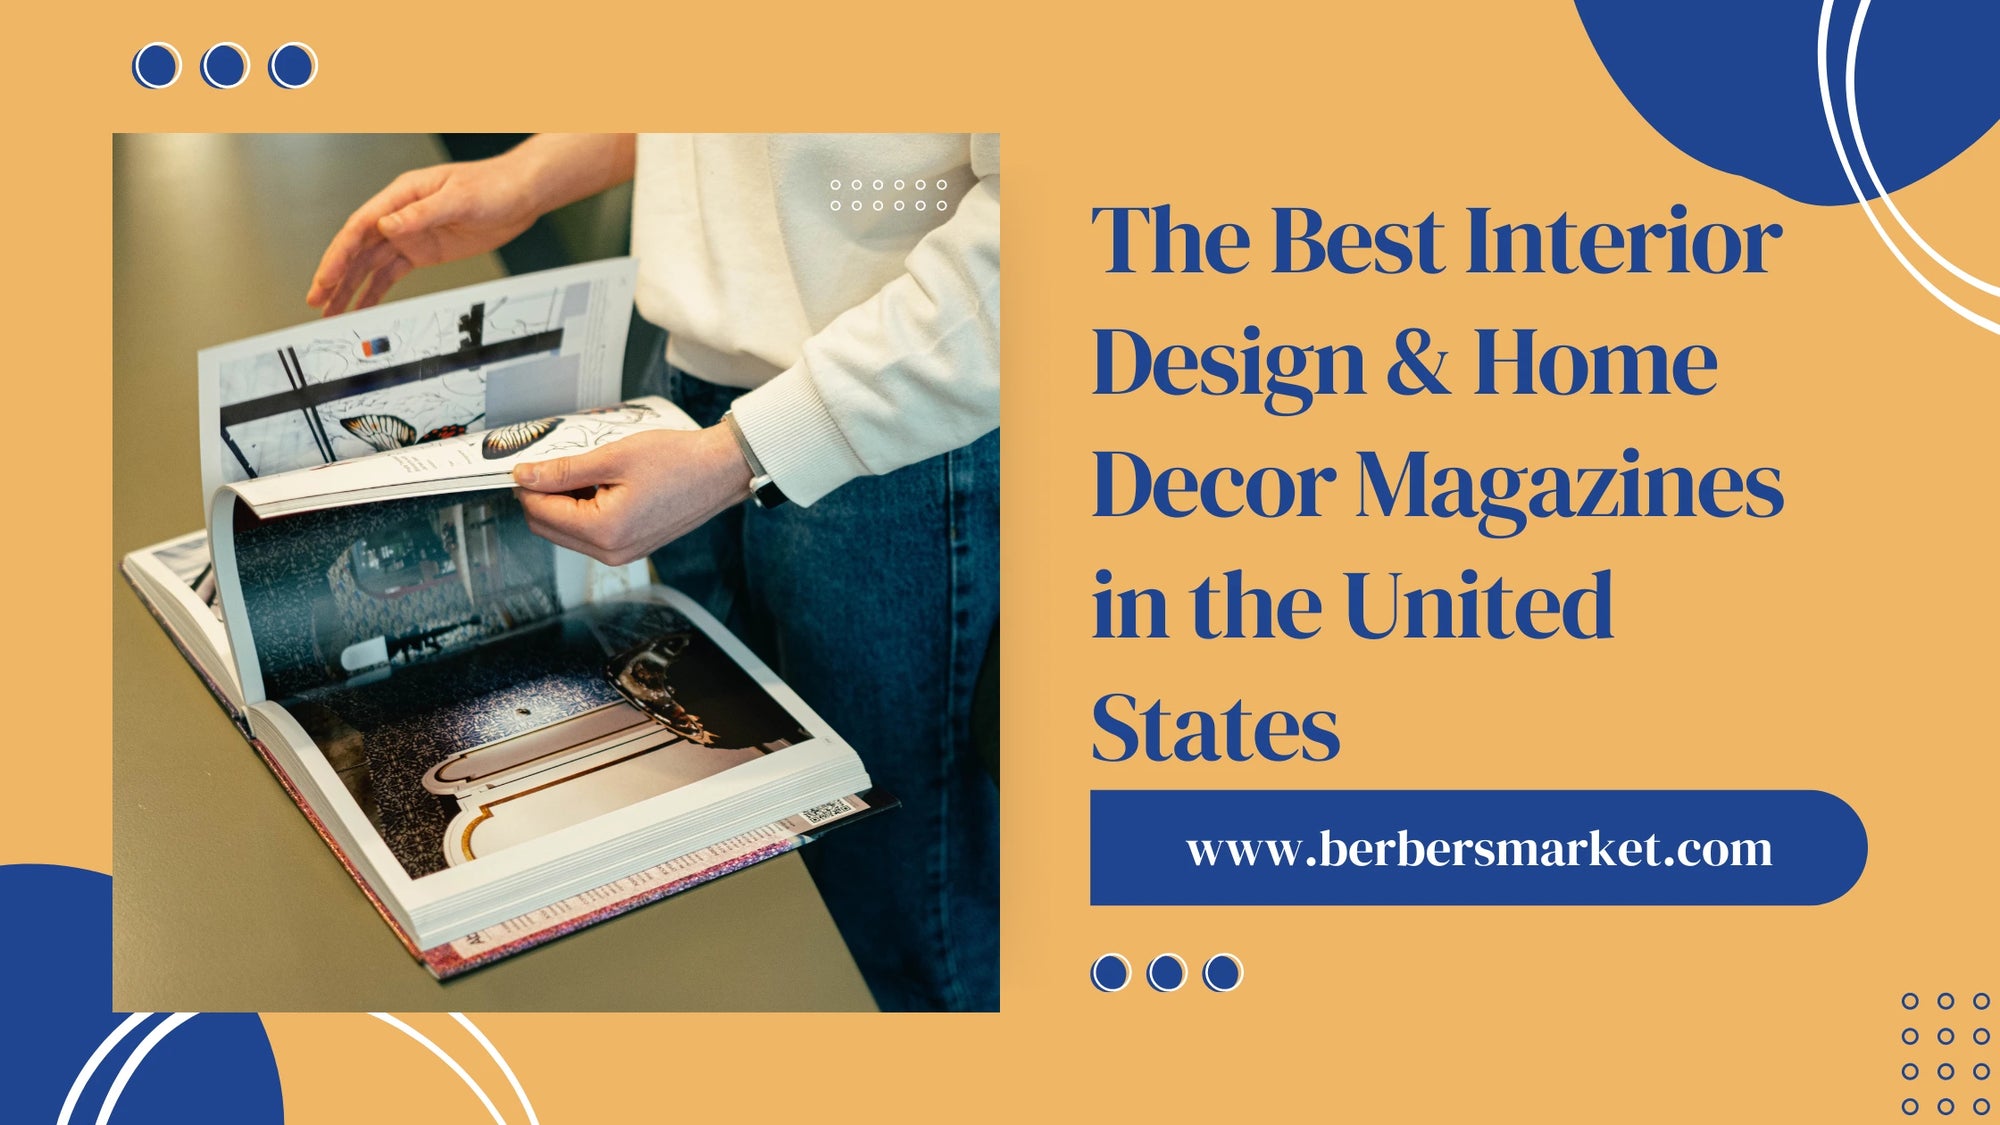 Blog banner talking about: "The Best Interior Design & Home Decor Magazines in the United States" with a picture showing a men looking at an interior design magazine.